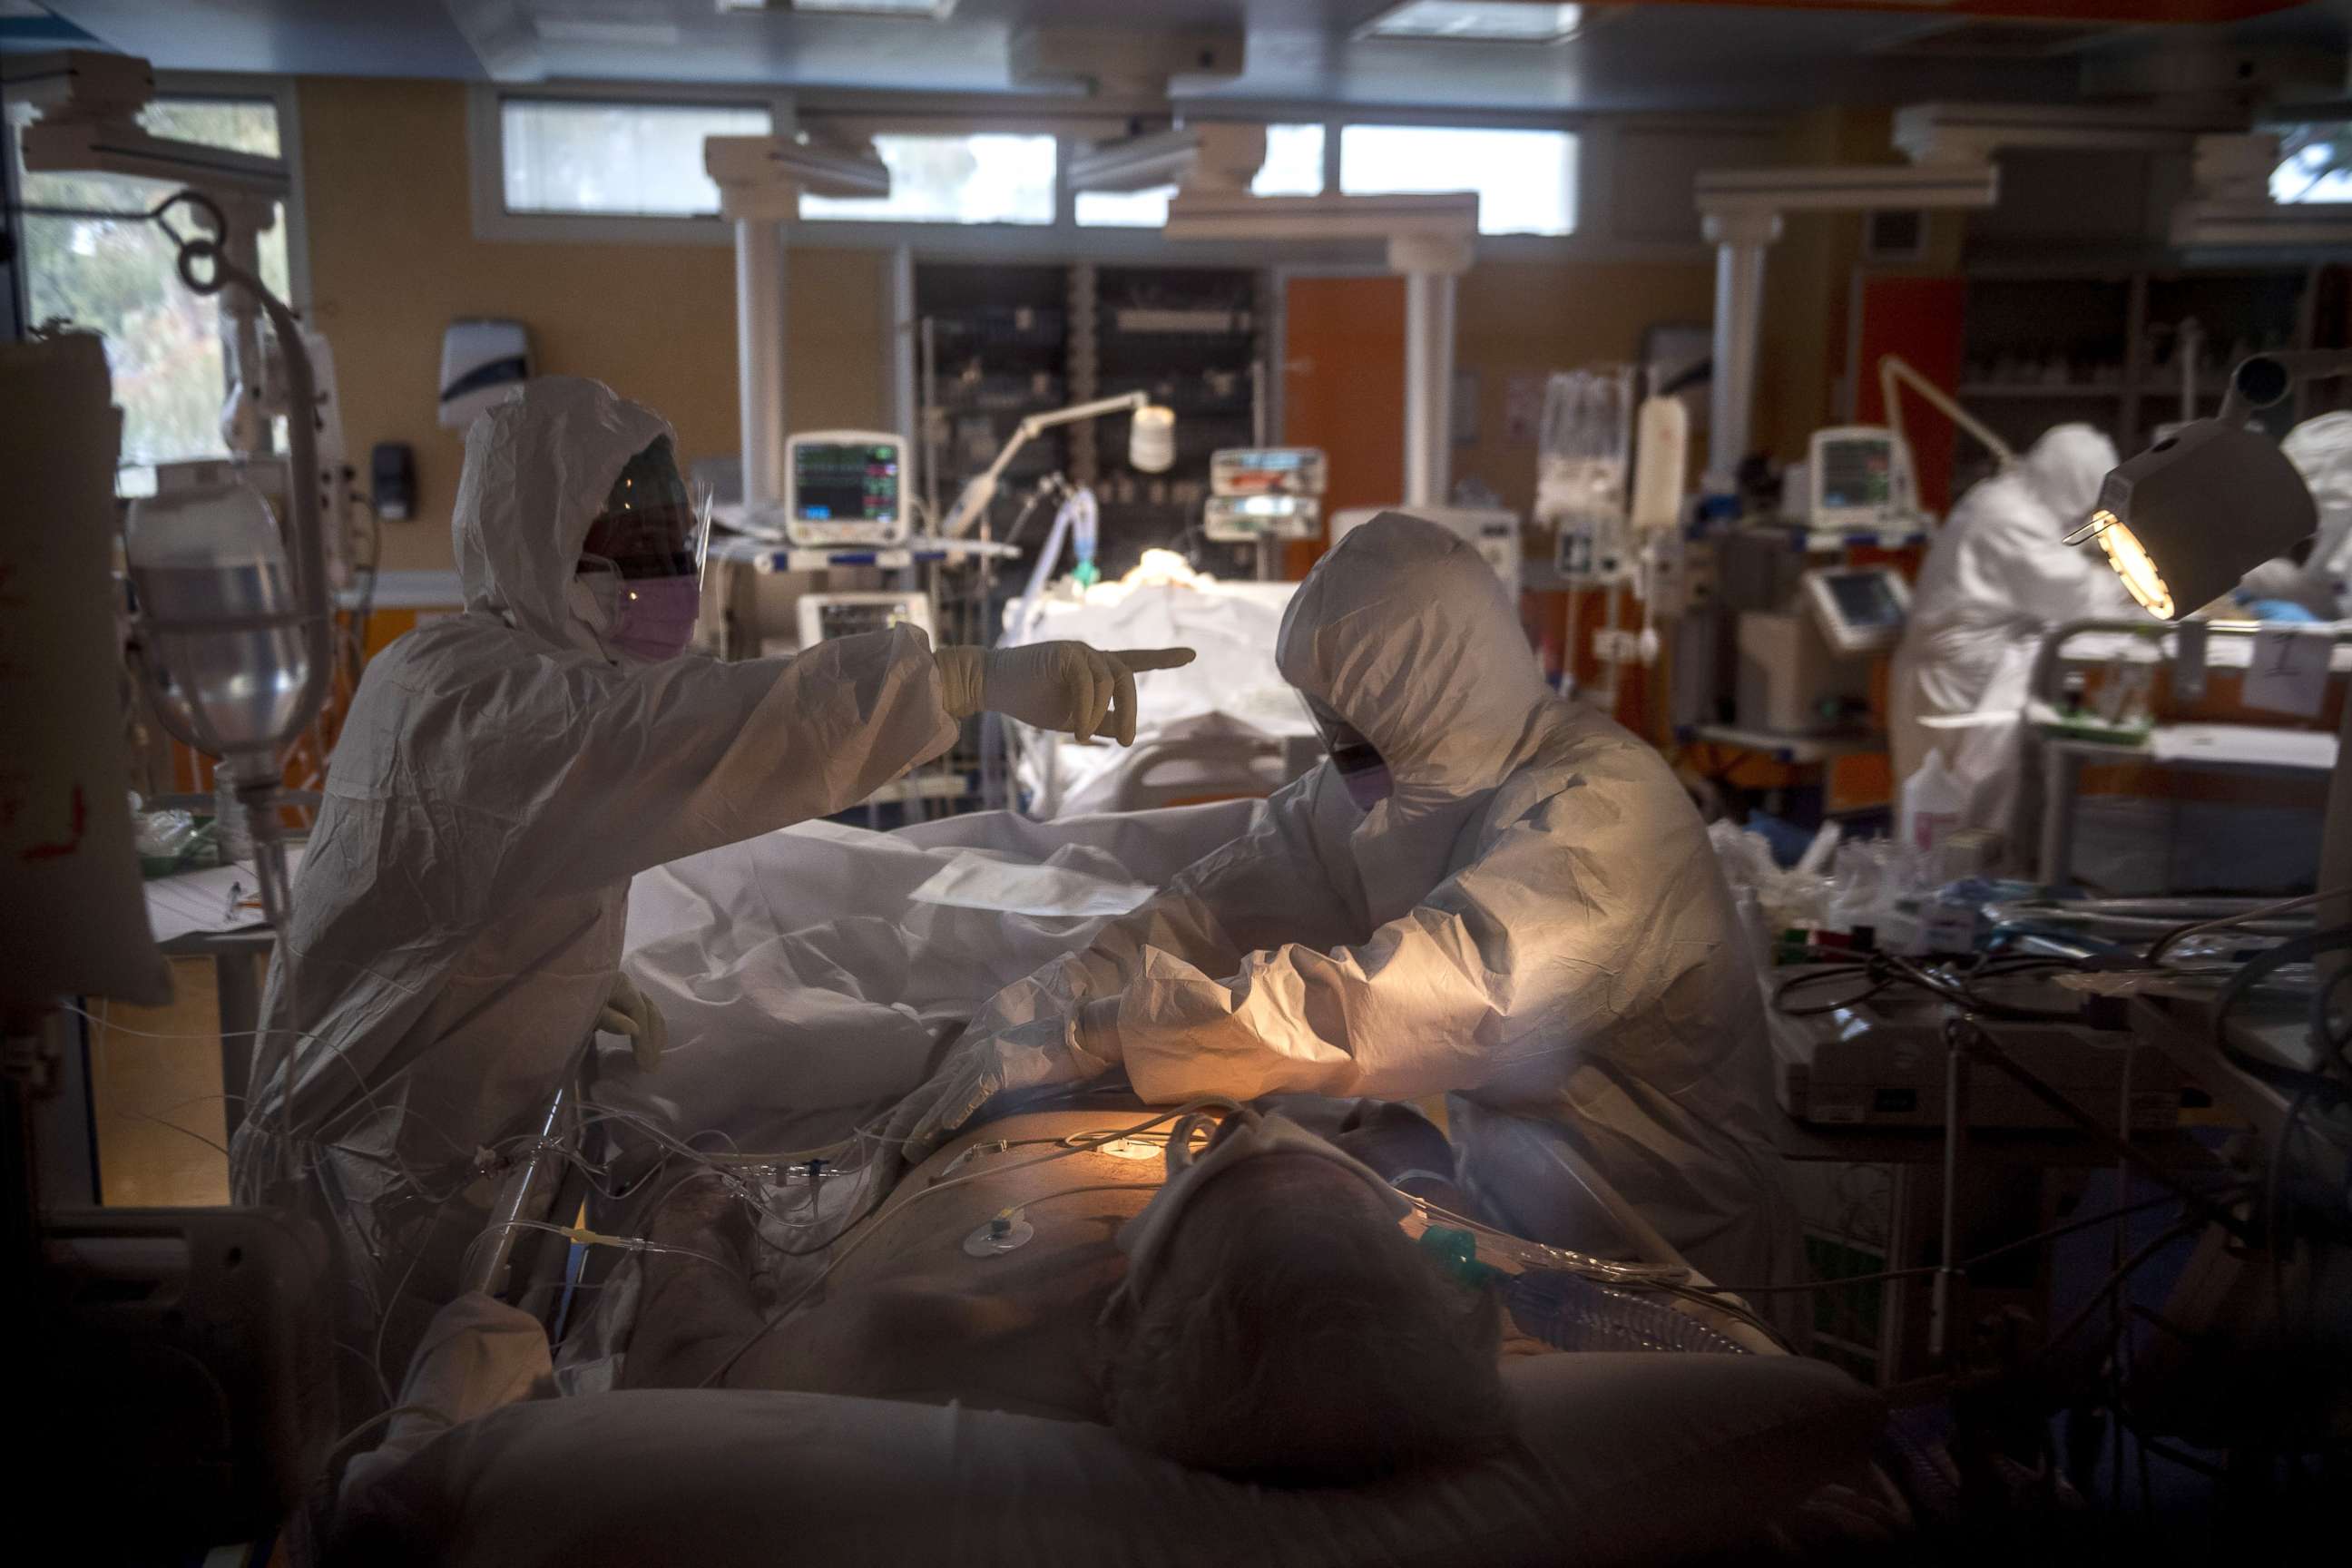 PHOTO: Doctors treat COVID-19 patients in an intensive care unit at a hospital in Rome during the coronavirus emergency on March 26, 2020.